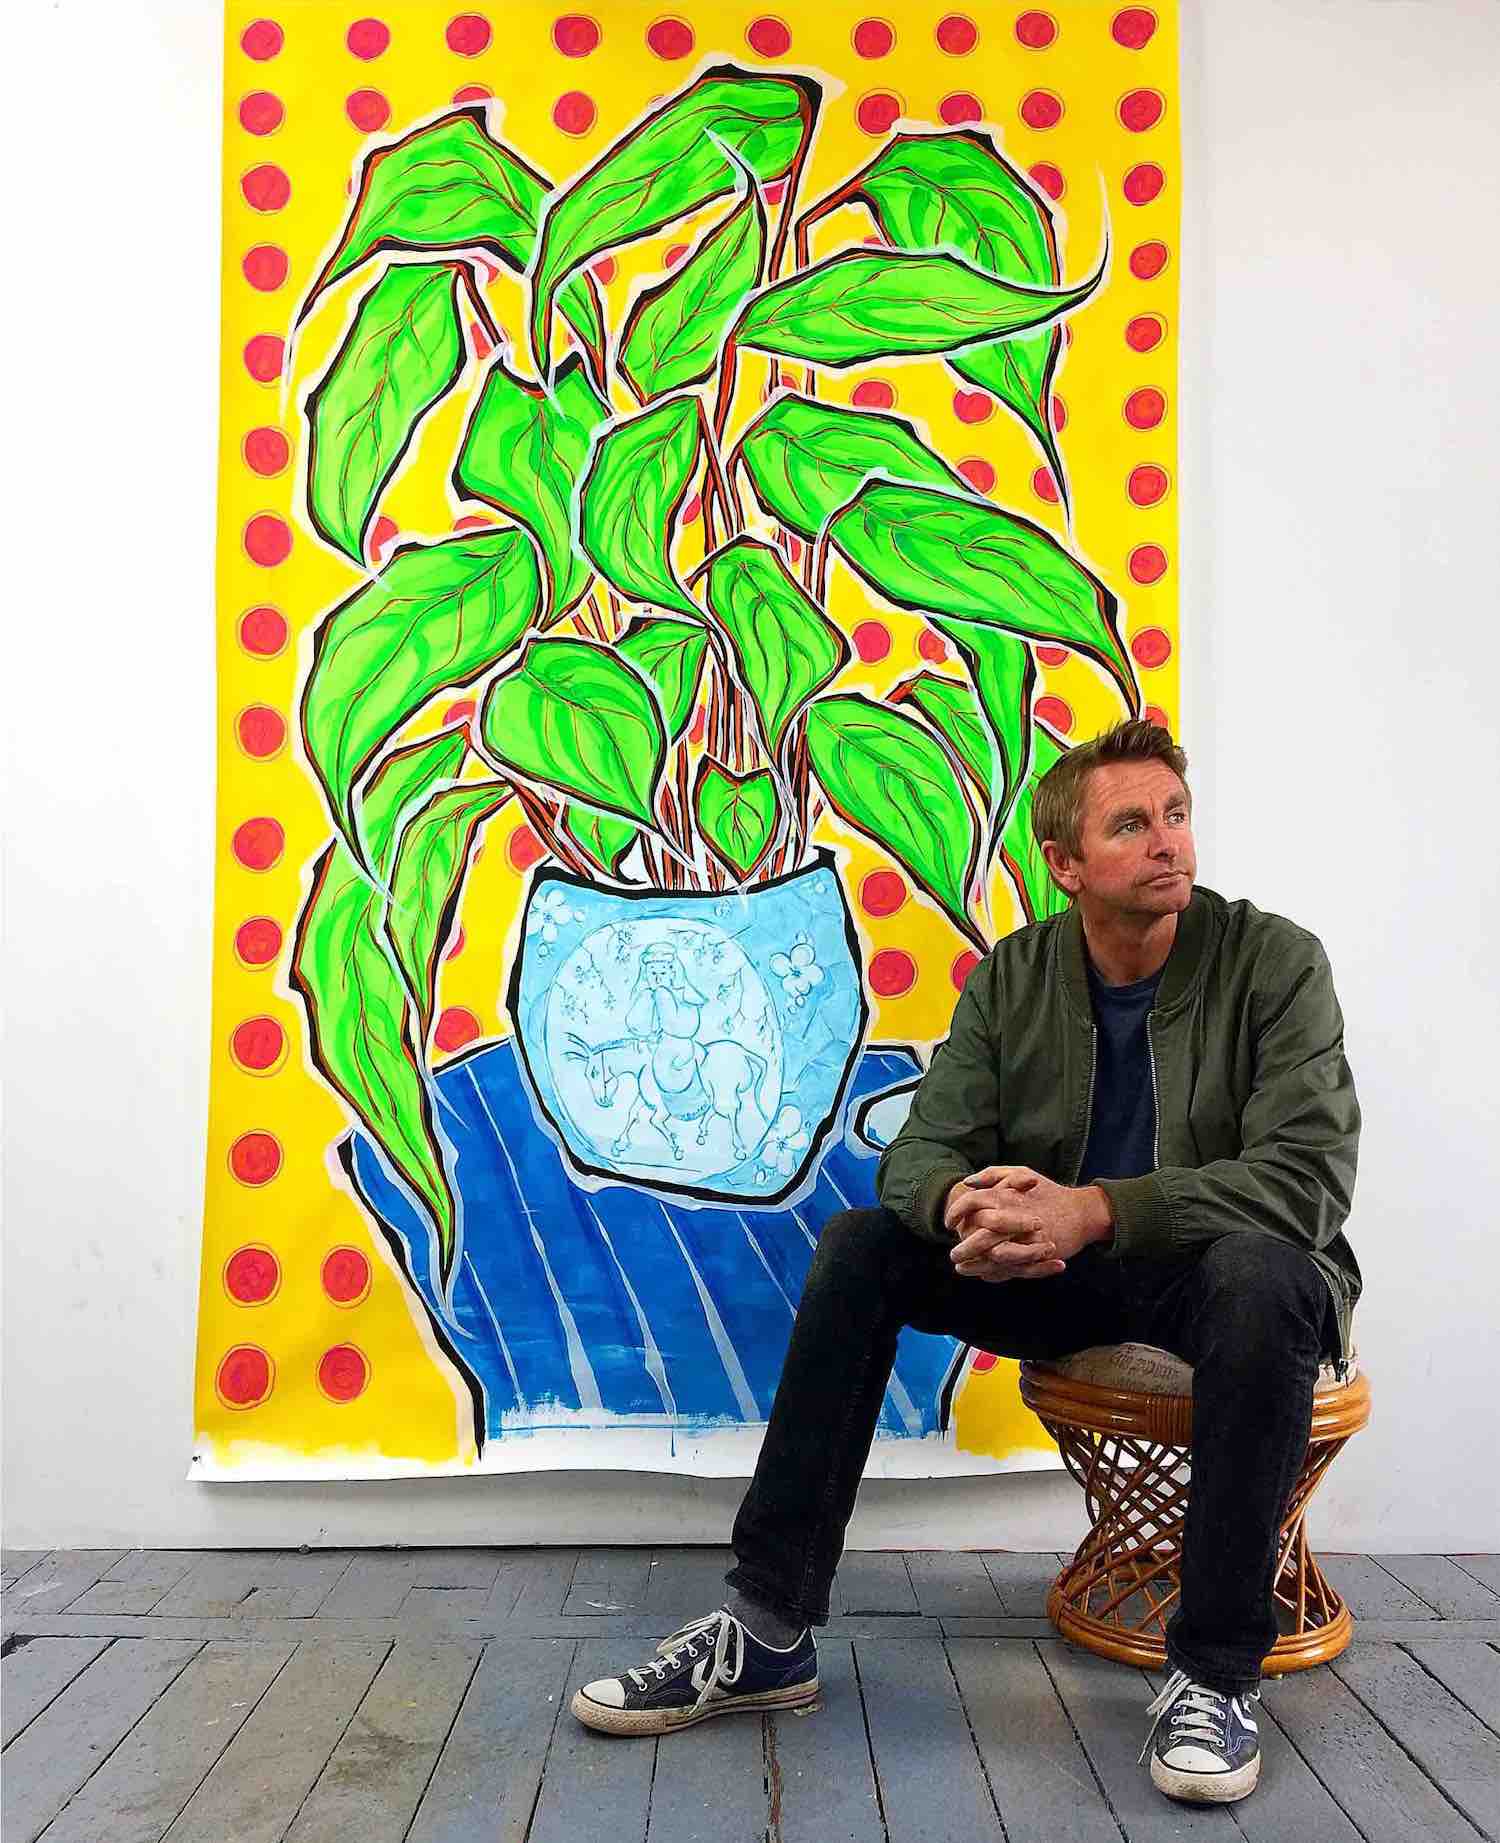 Leicester artist to exhibit in Los Angeles